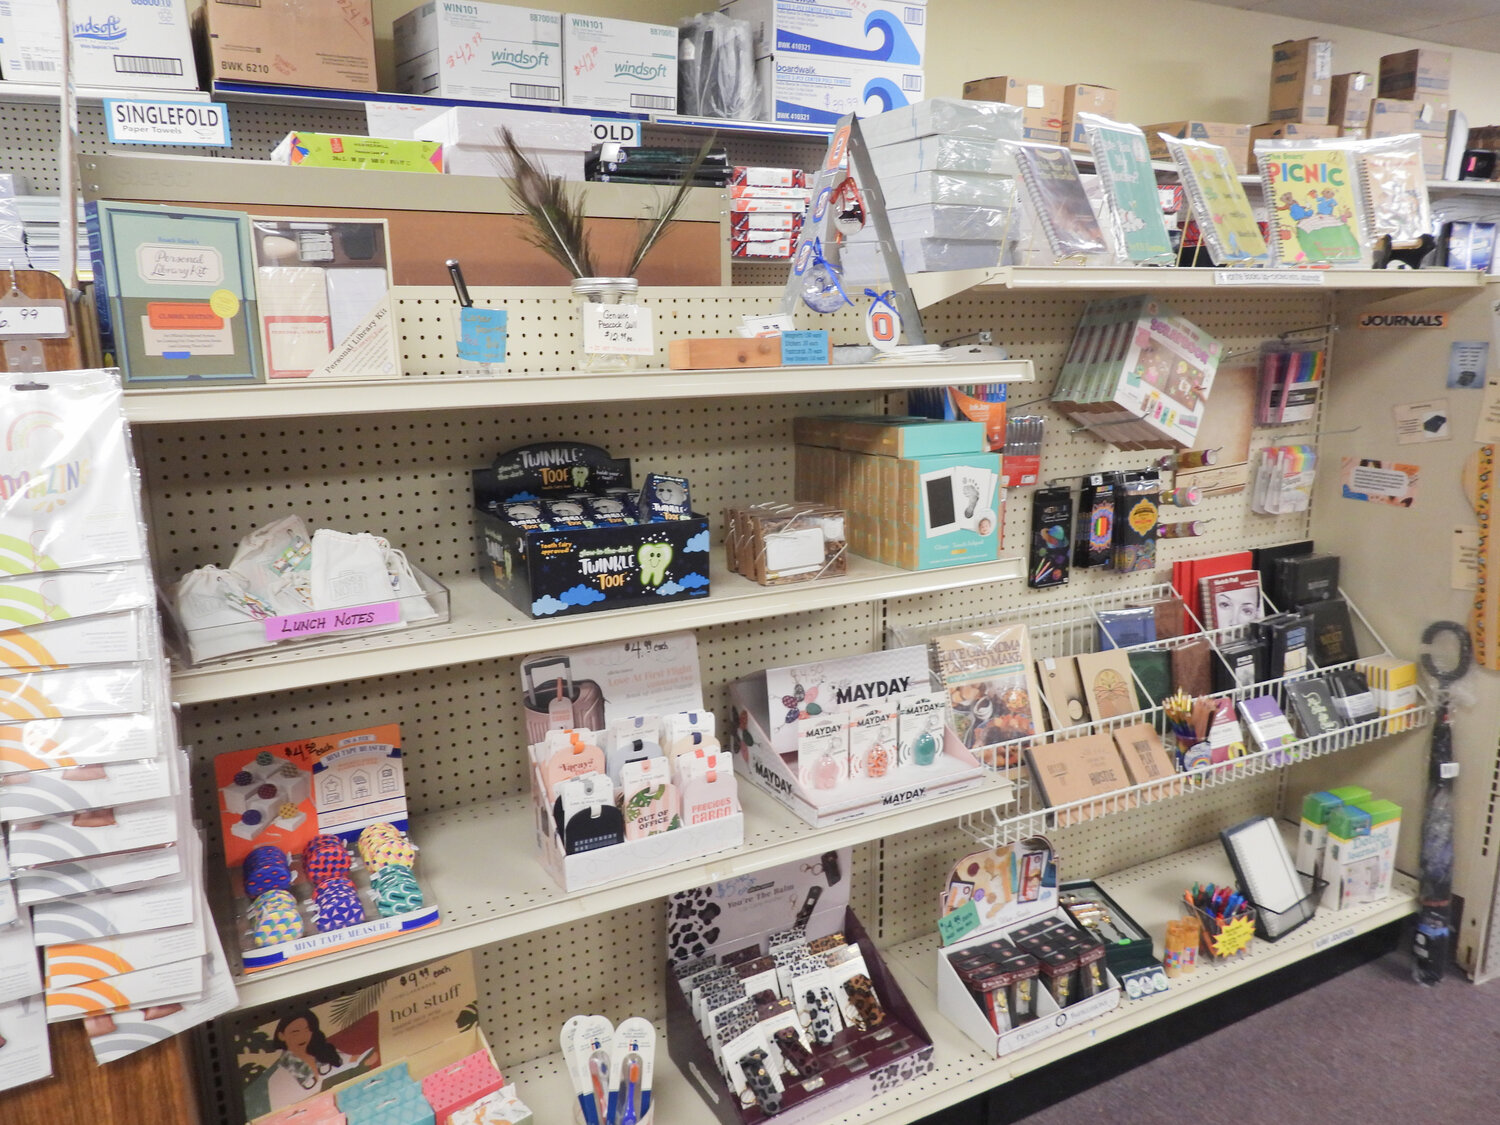 Oneida Office Supply offers more than just supplies for the home and office